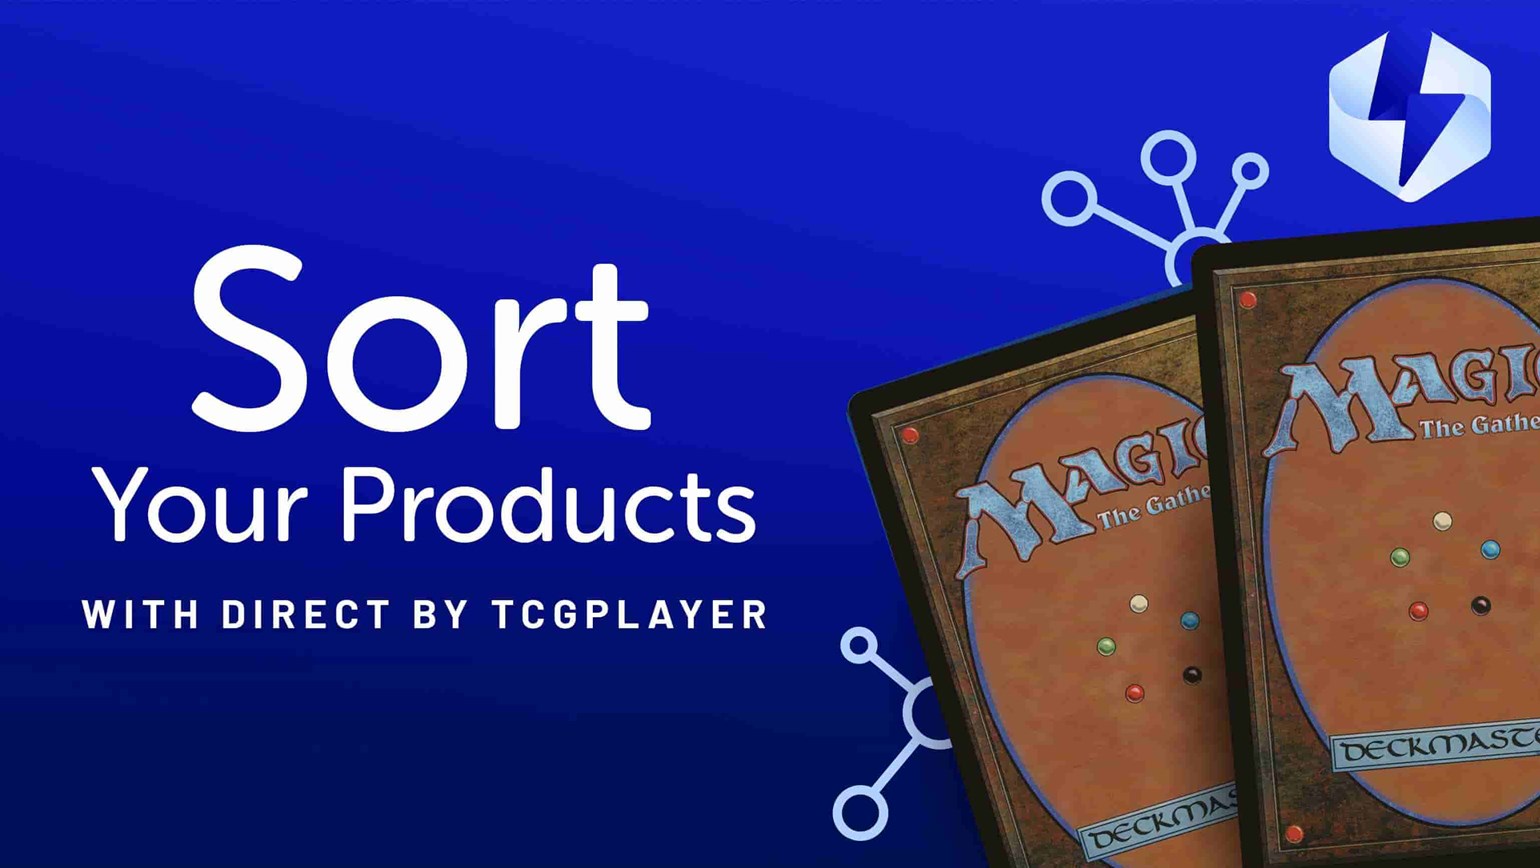 Sort Your Products with Direct by TCGplayer